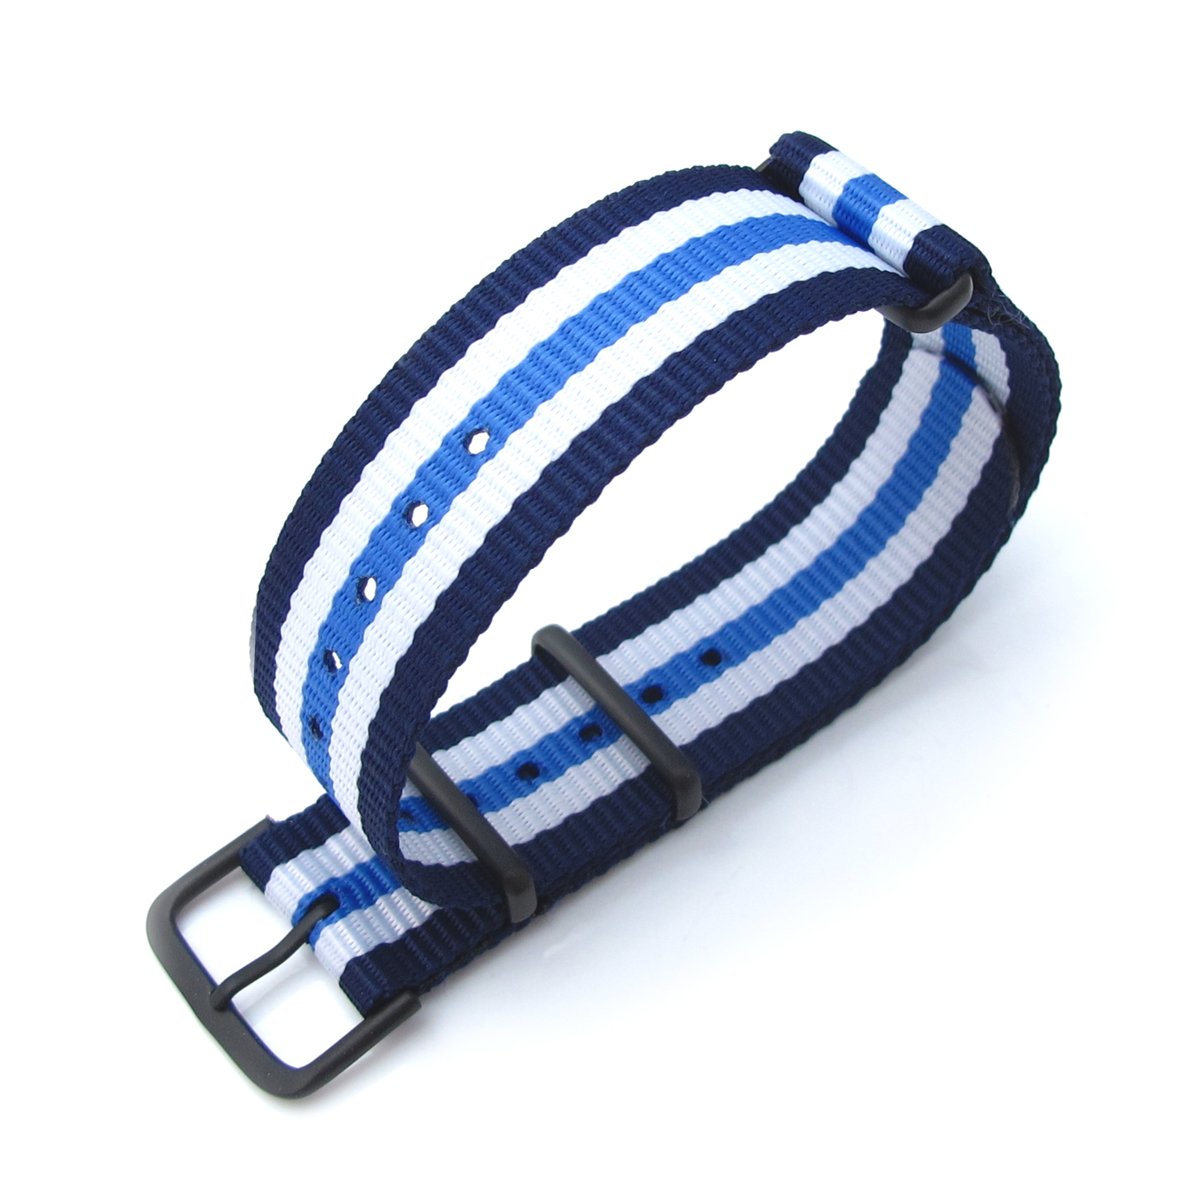 MiLTAT 20mm G10 military watch strap ballistic nylon armband PVD Blue & White Stripes Strapcode Watch Bands